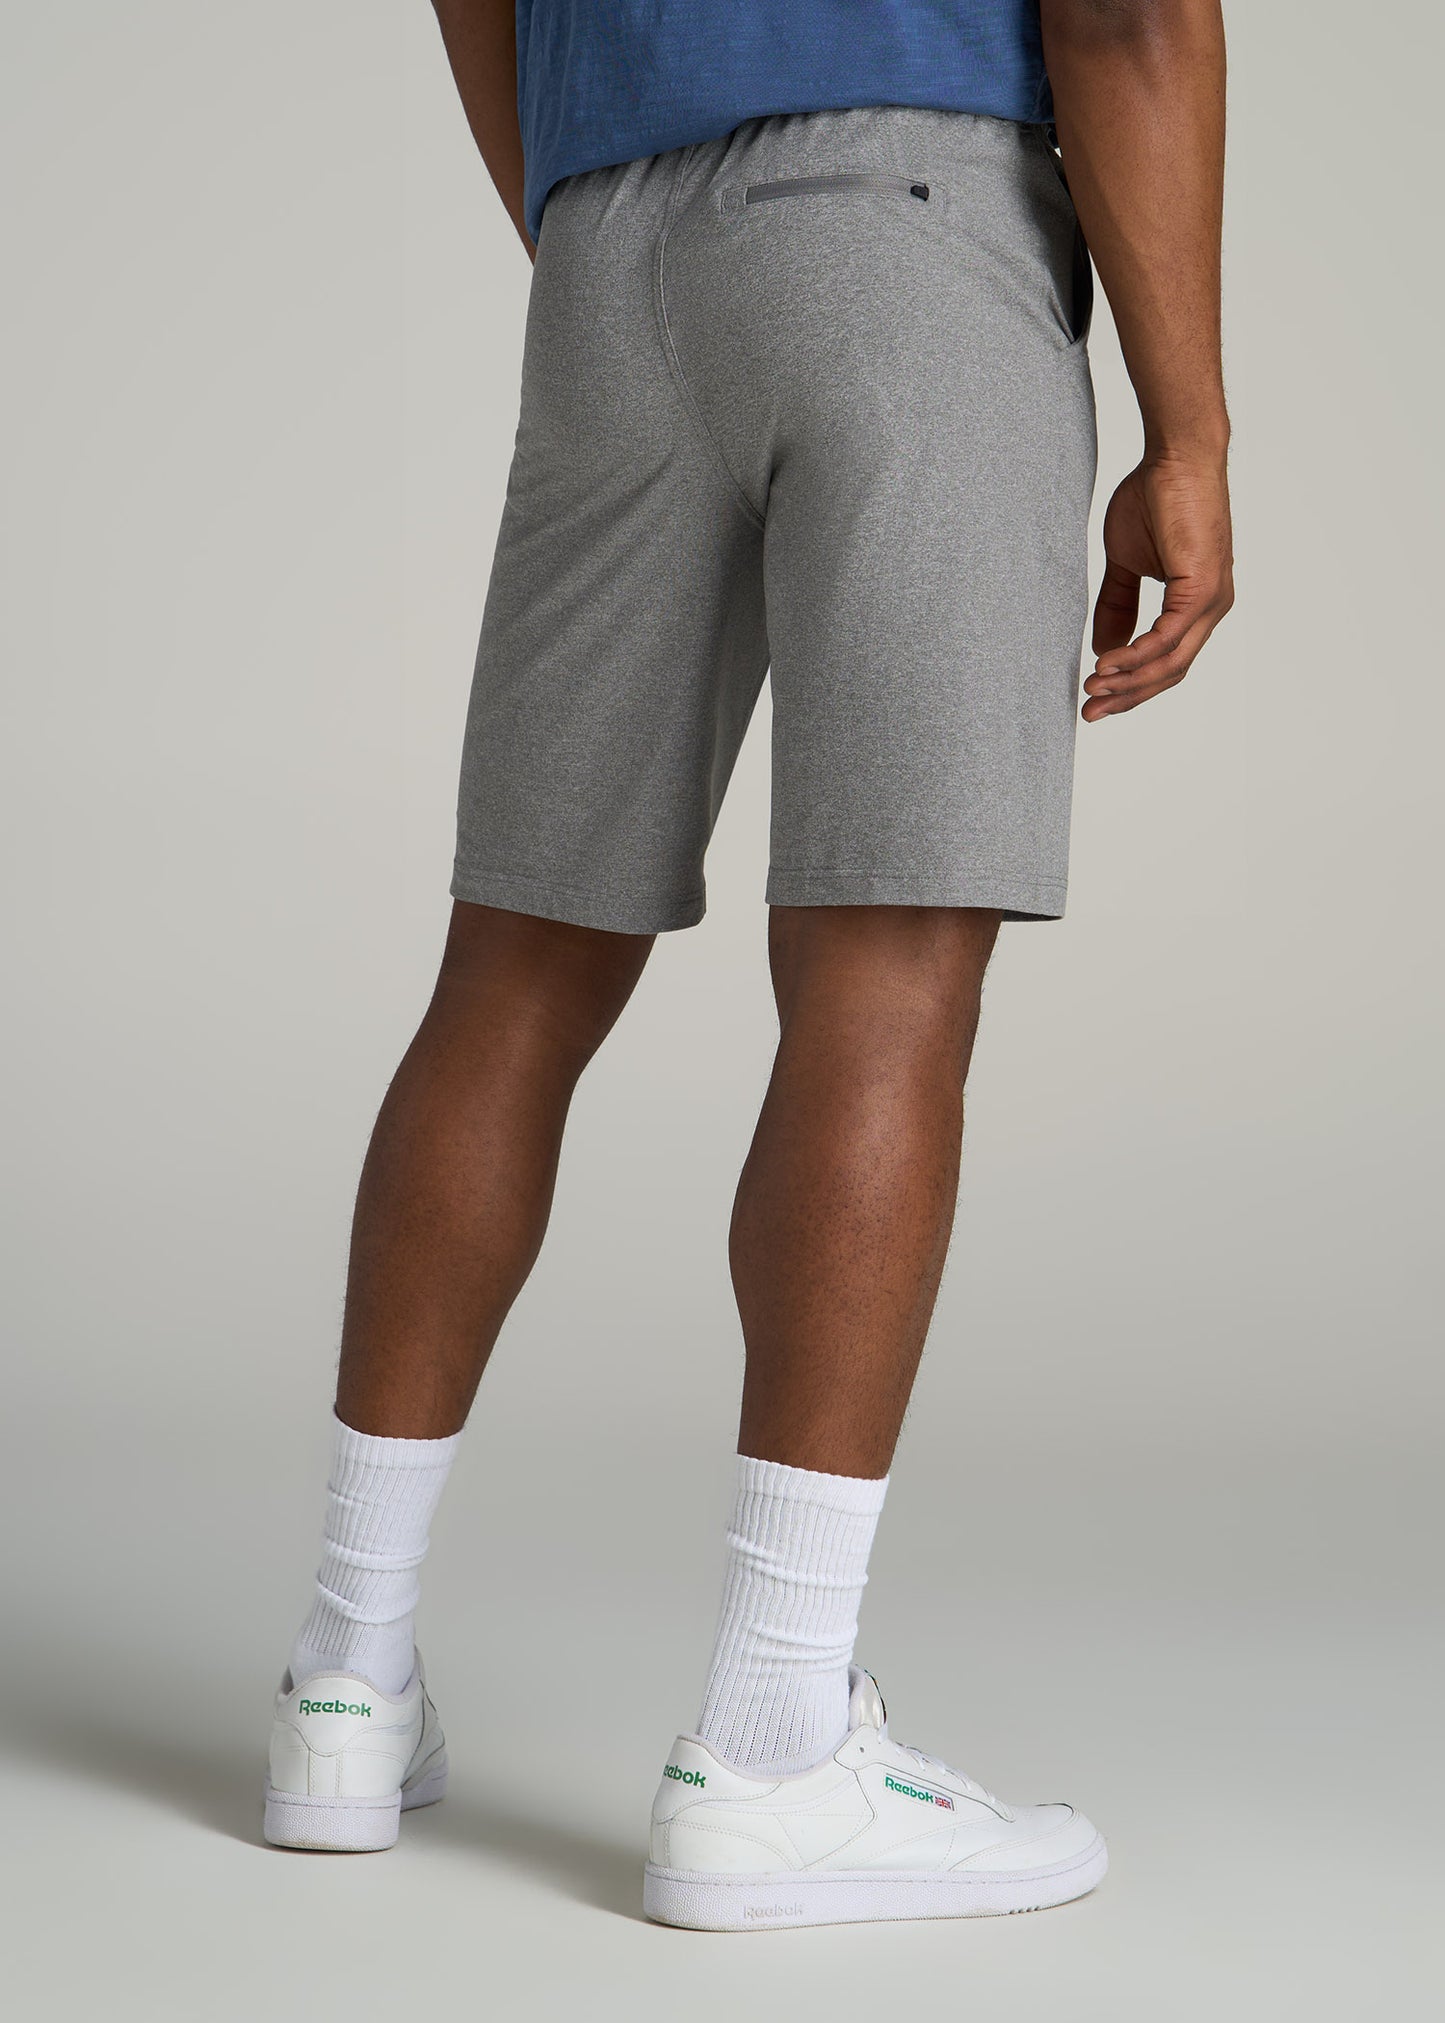 Weekender Stretch Lounge Shorts for Tall Men in Heathered Grey